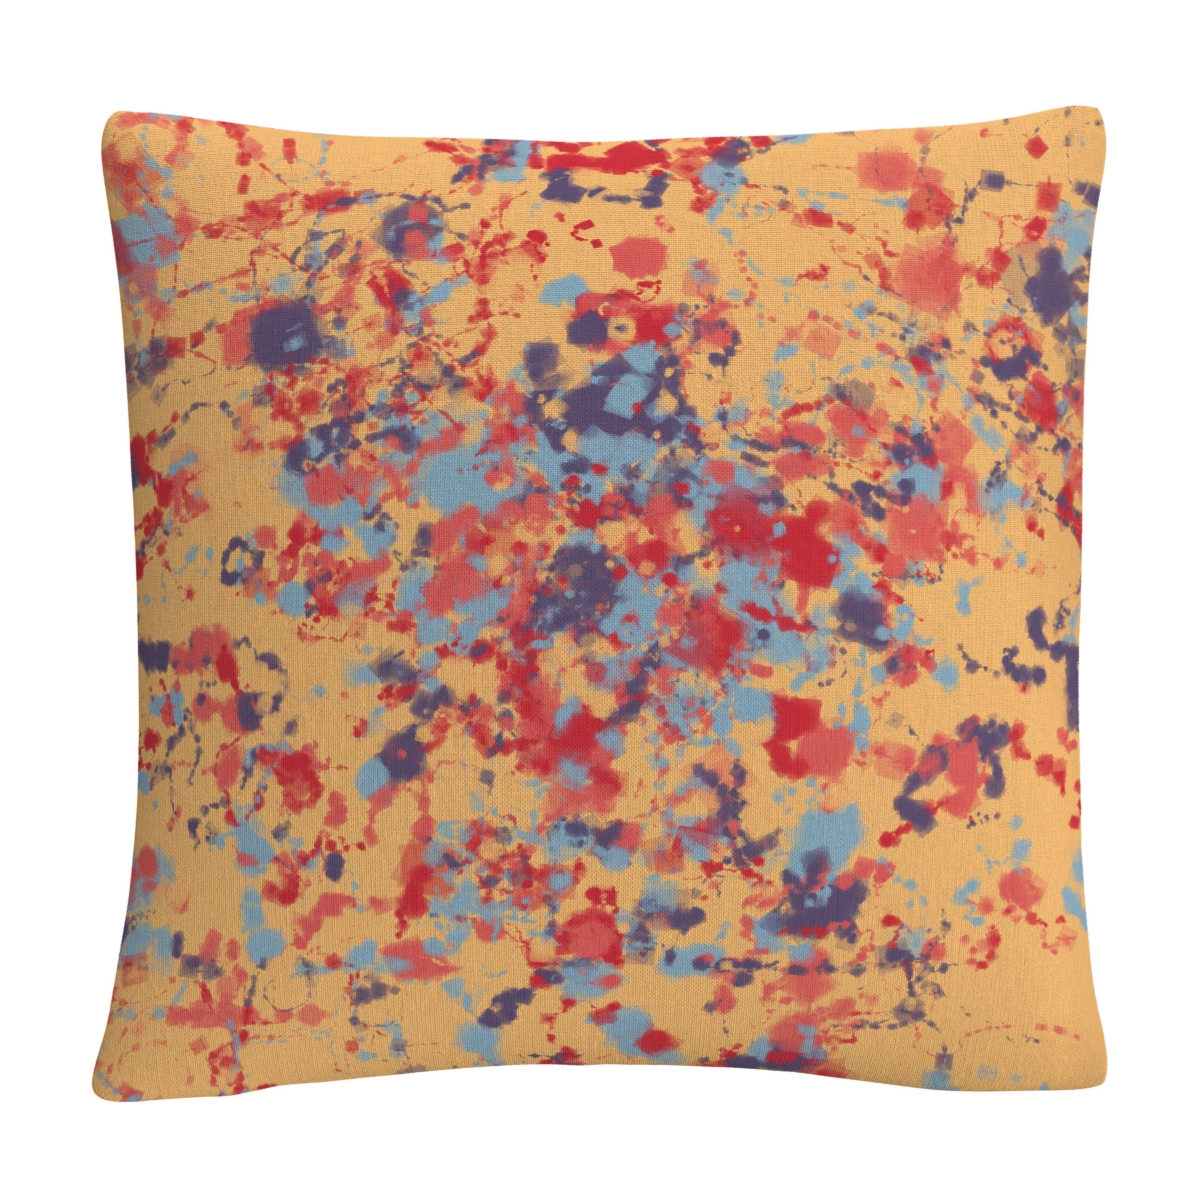 Abc Speckled Colorful Splatter Abstract 5Decorative Pillow, 16 x 16